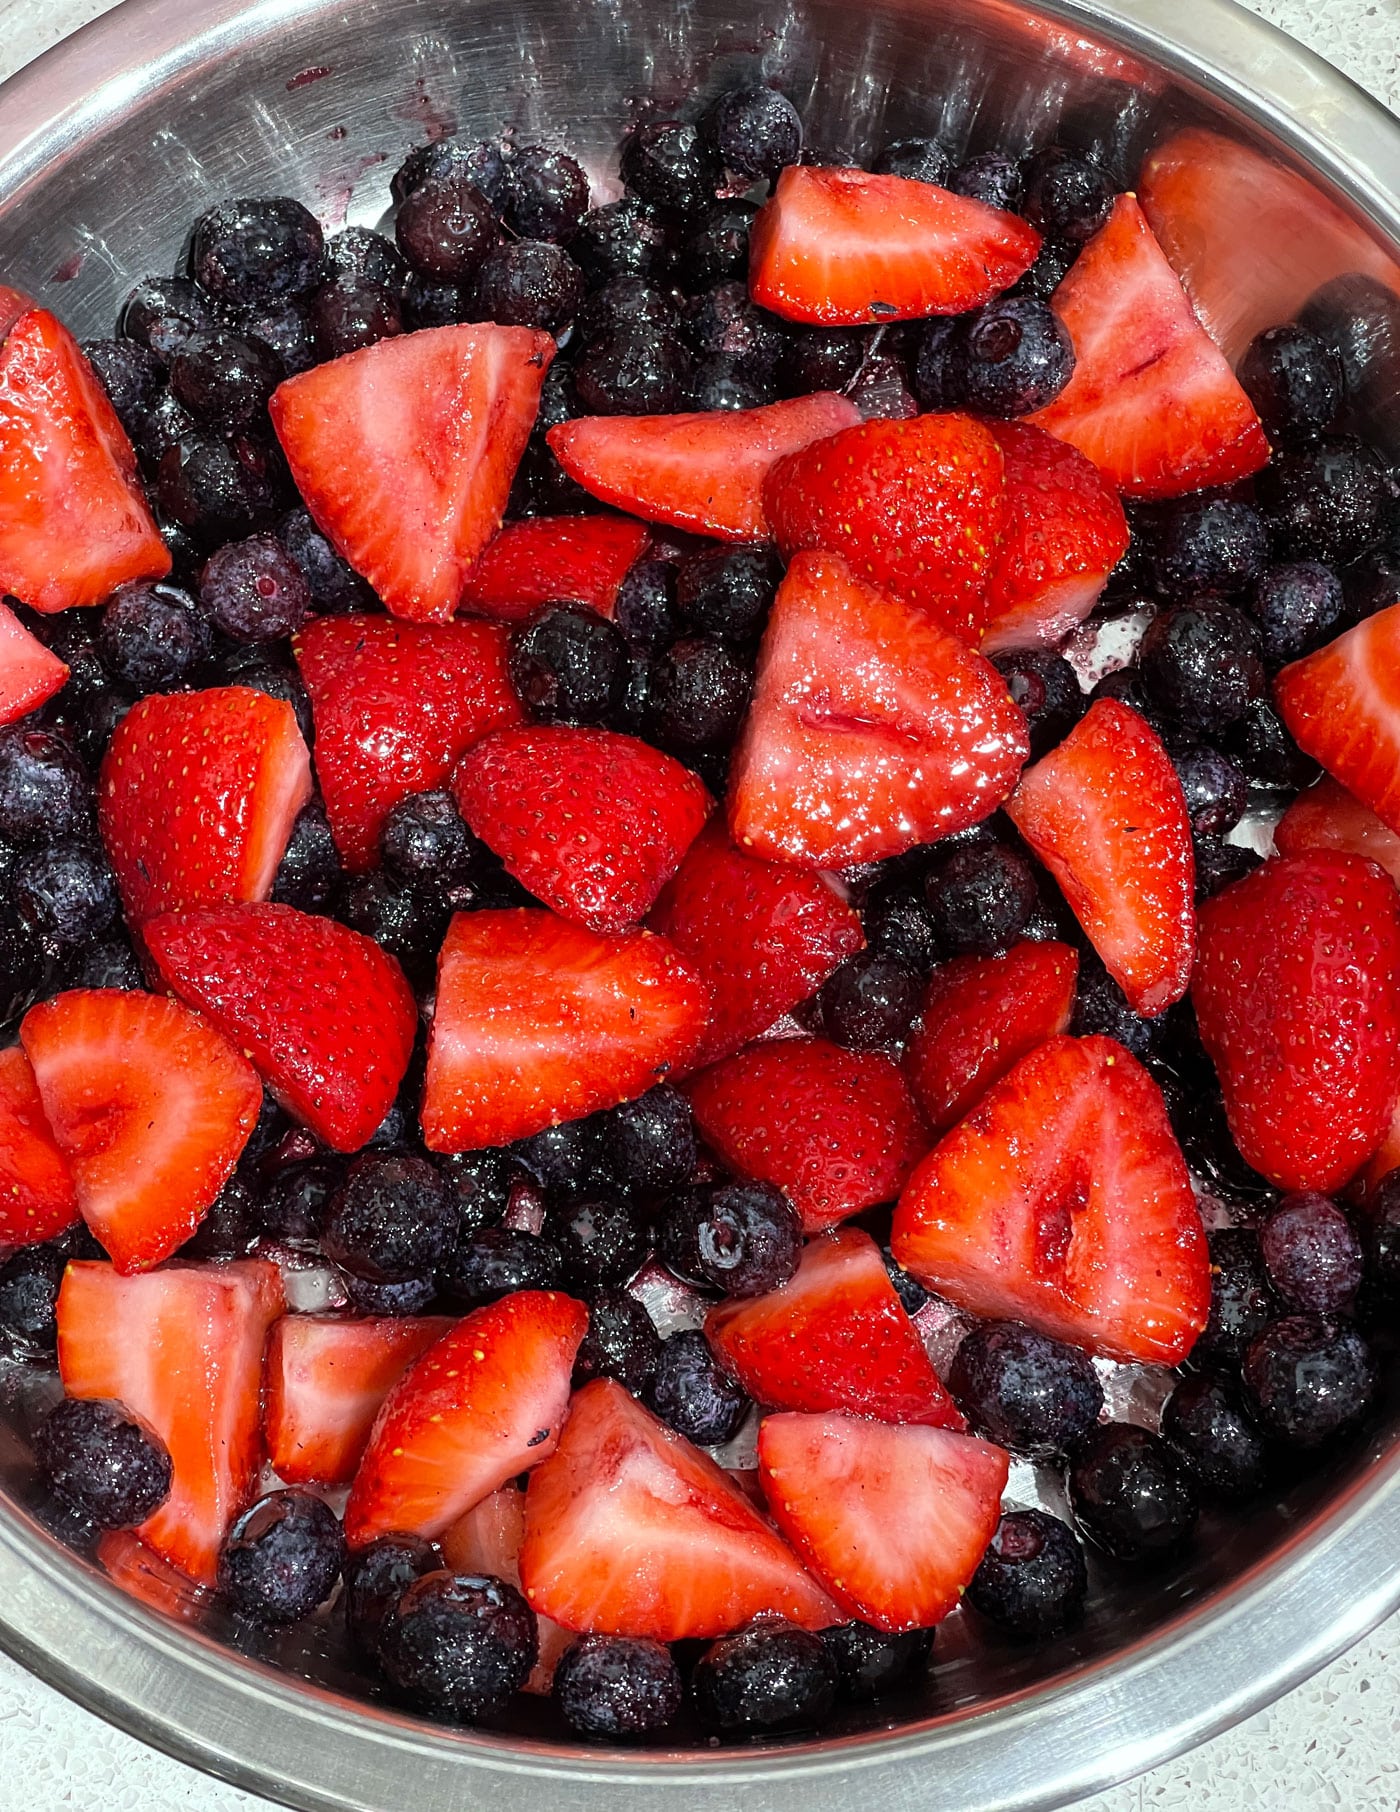 berries arranged in a single layer in the baking pan